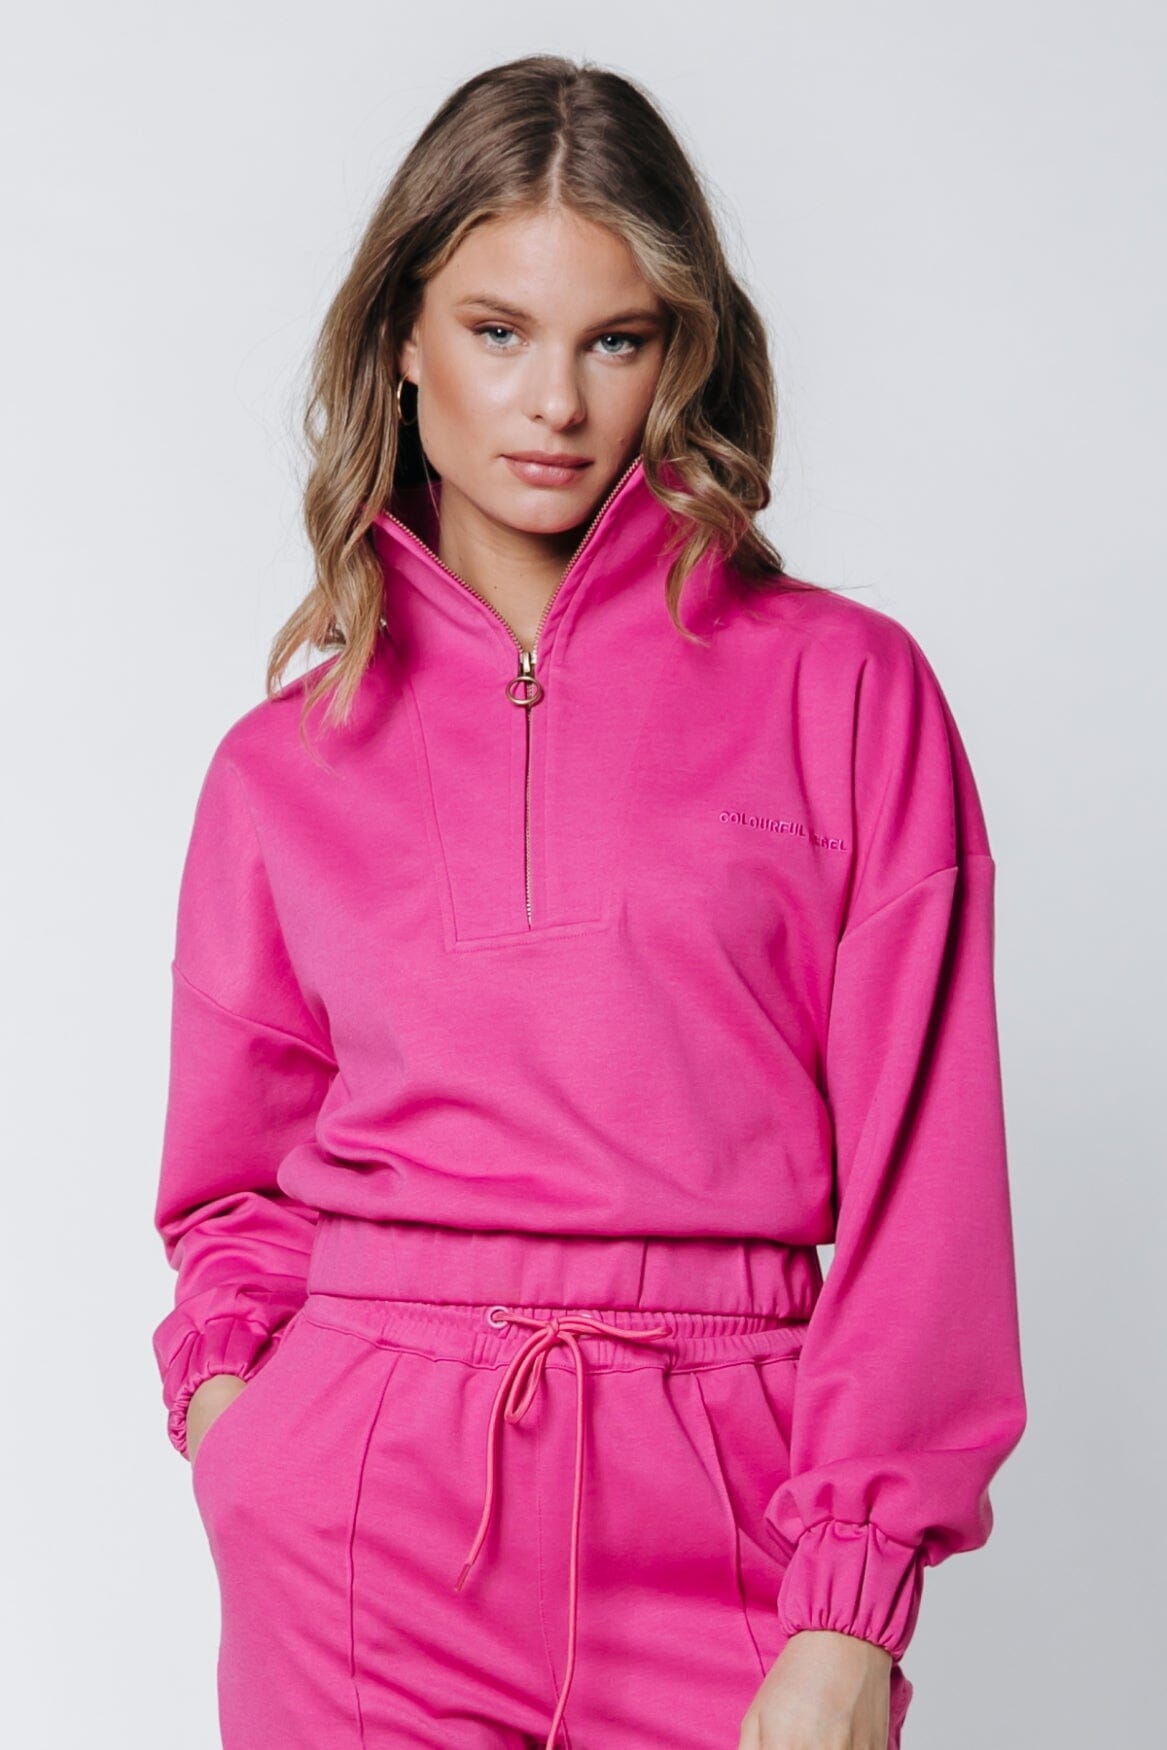 Colourful Rebel Litzy Dropped Shoulder Zipper Sweater | Sweet Pink 8720603284868